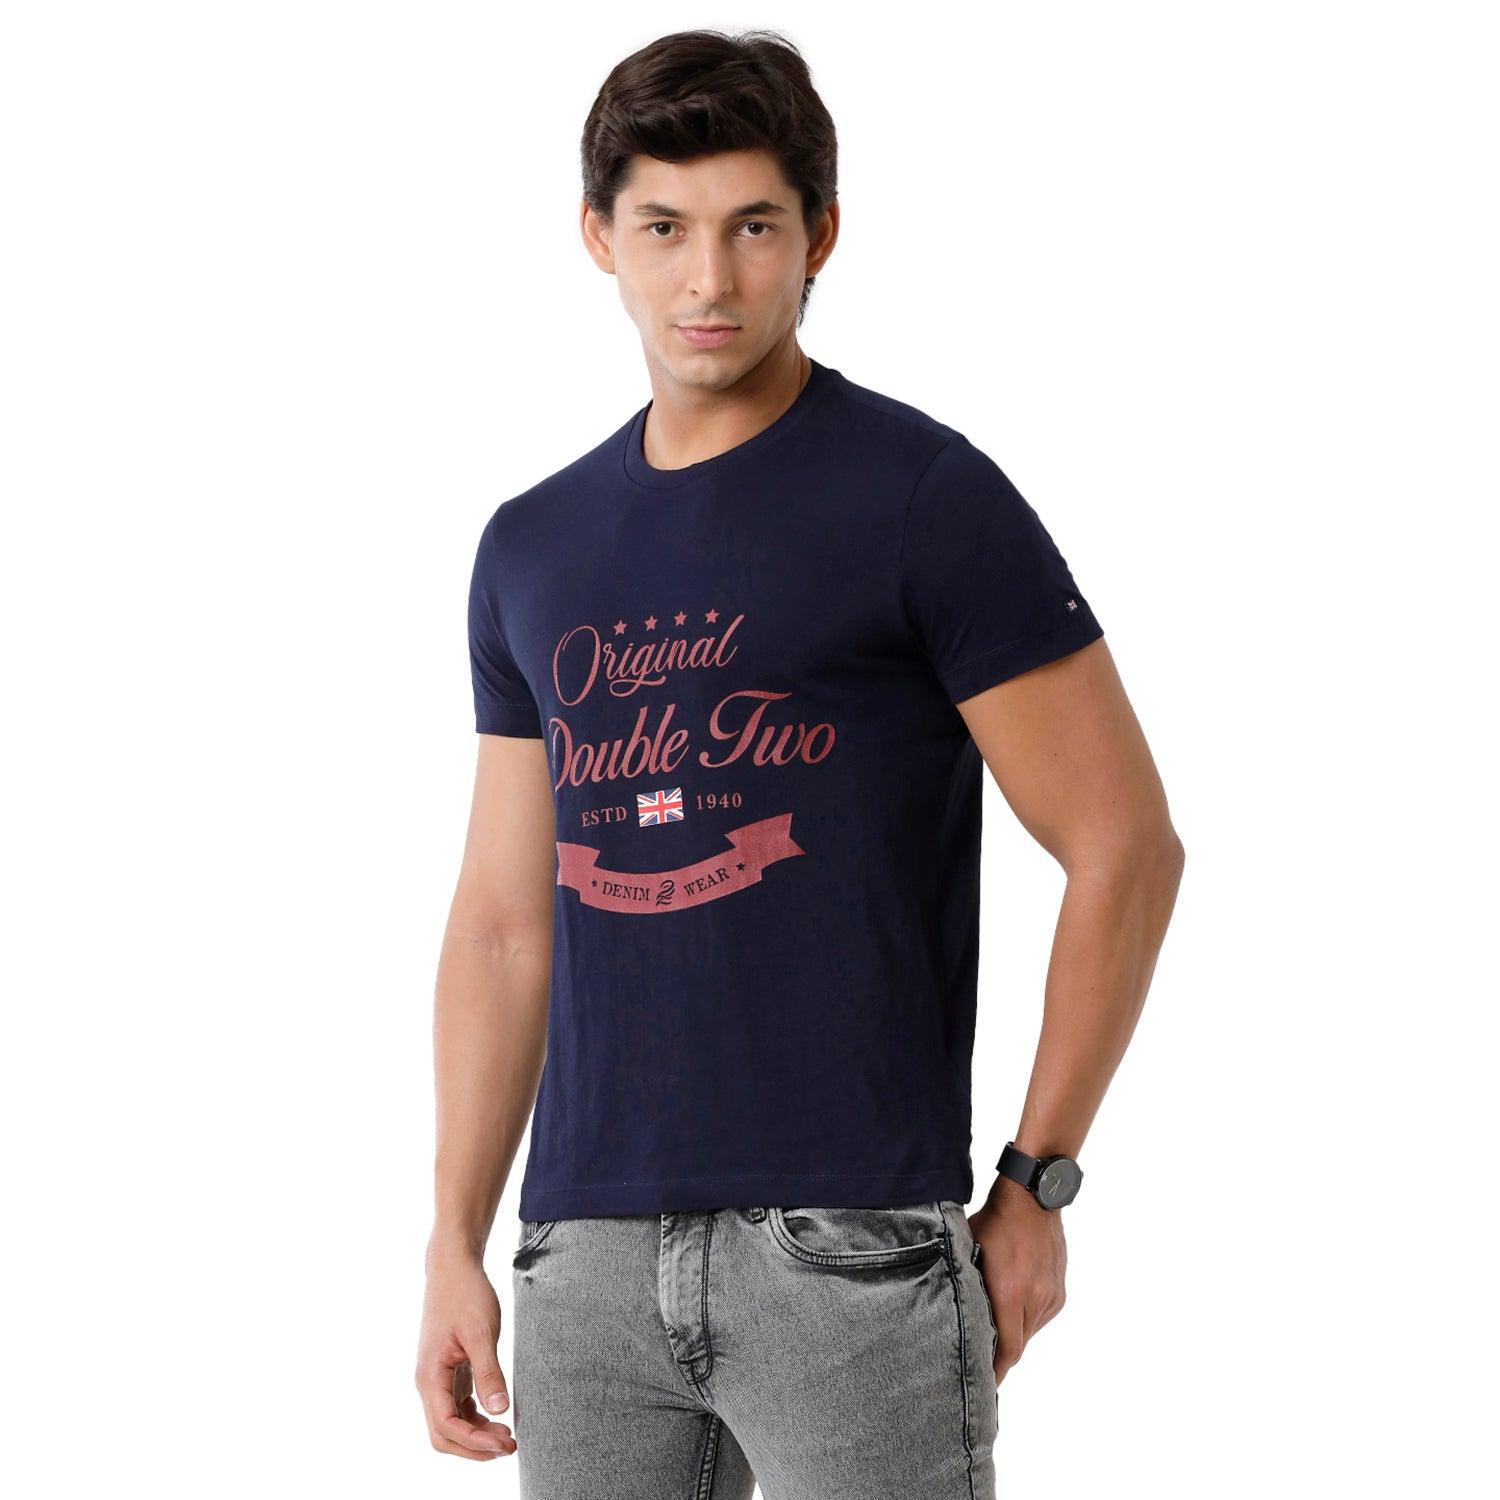 Double Two Printed Crew Neck Navy T-Shirt